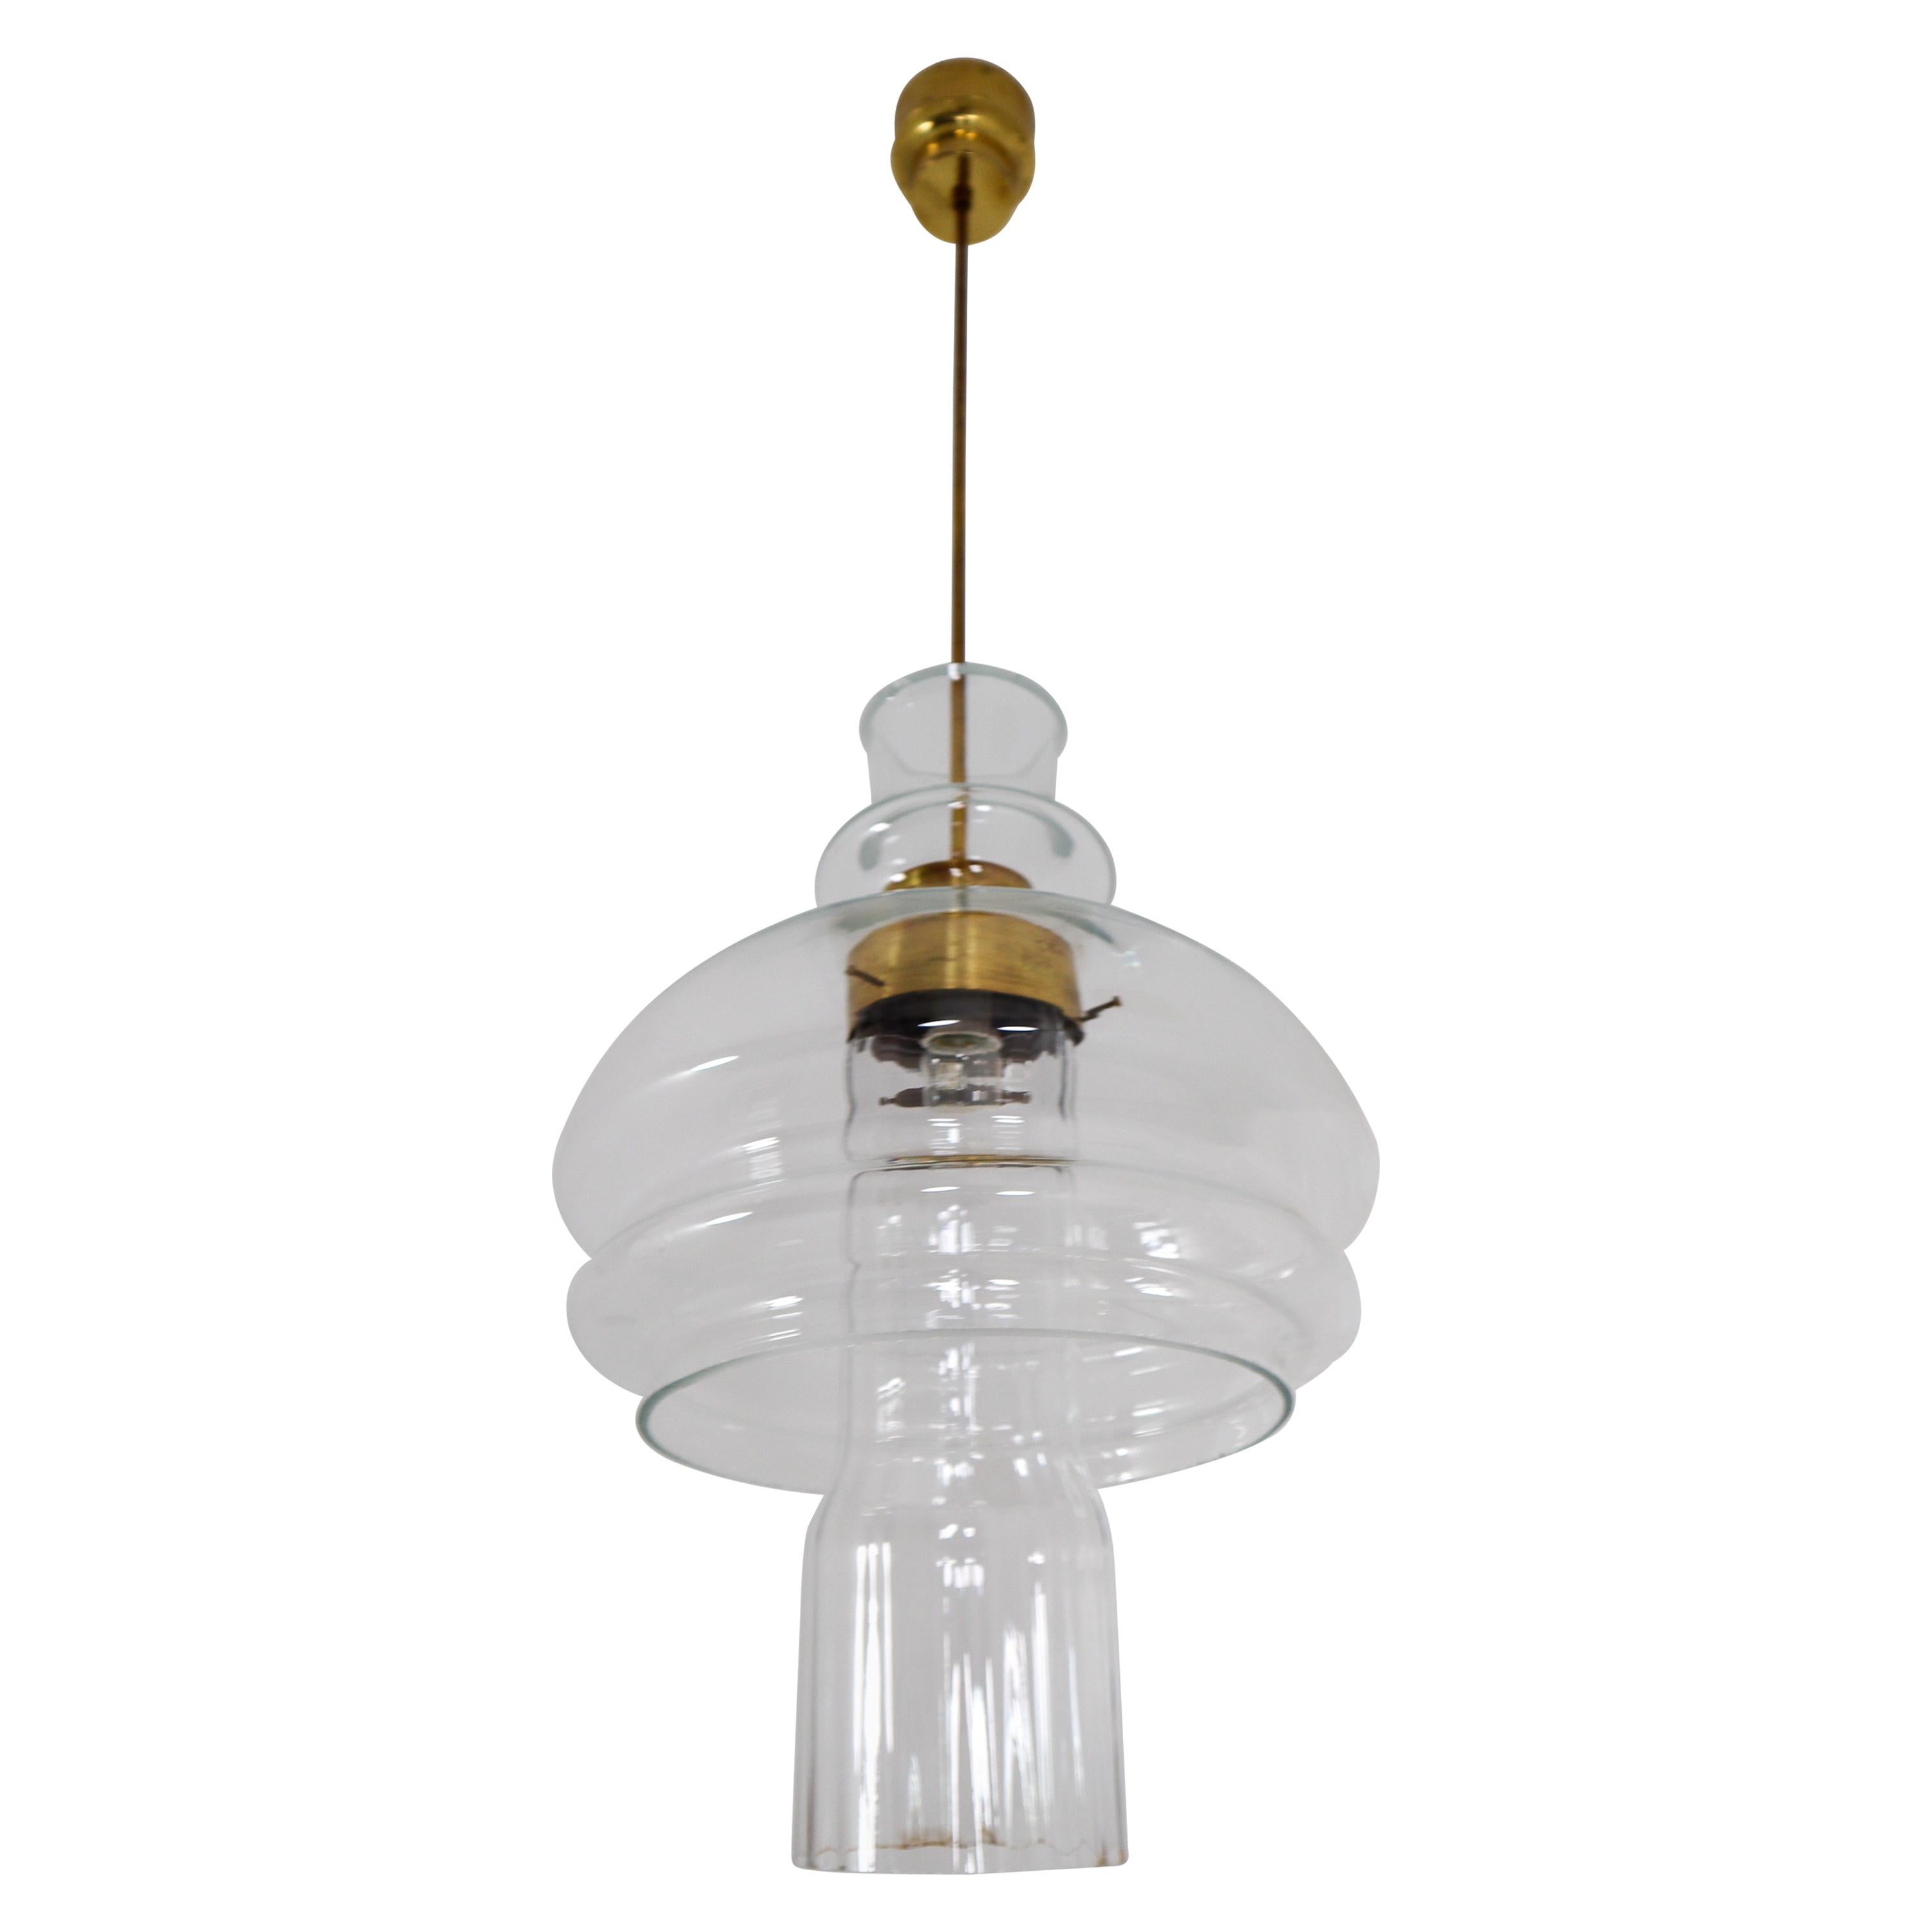  Large Midcentury Pendant, Clear Glass and Brass, Europe, 1960s